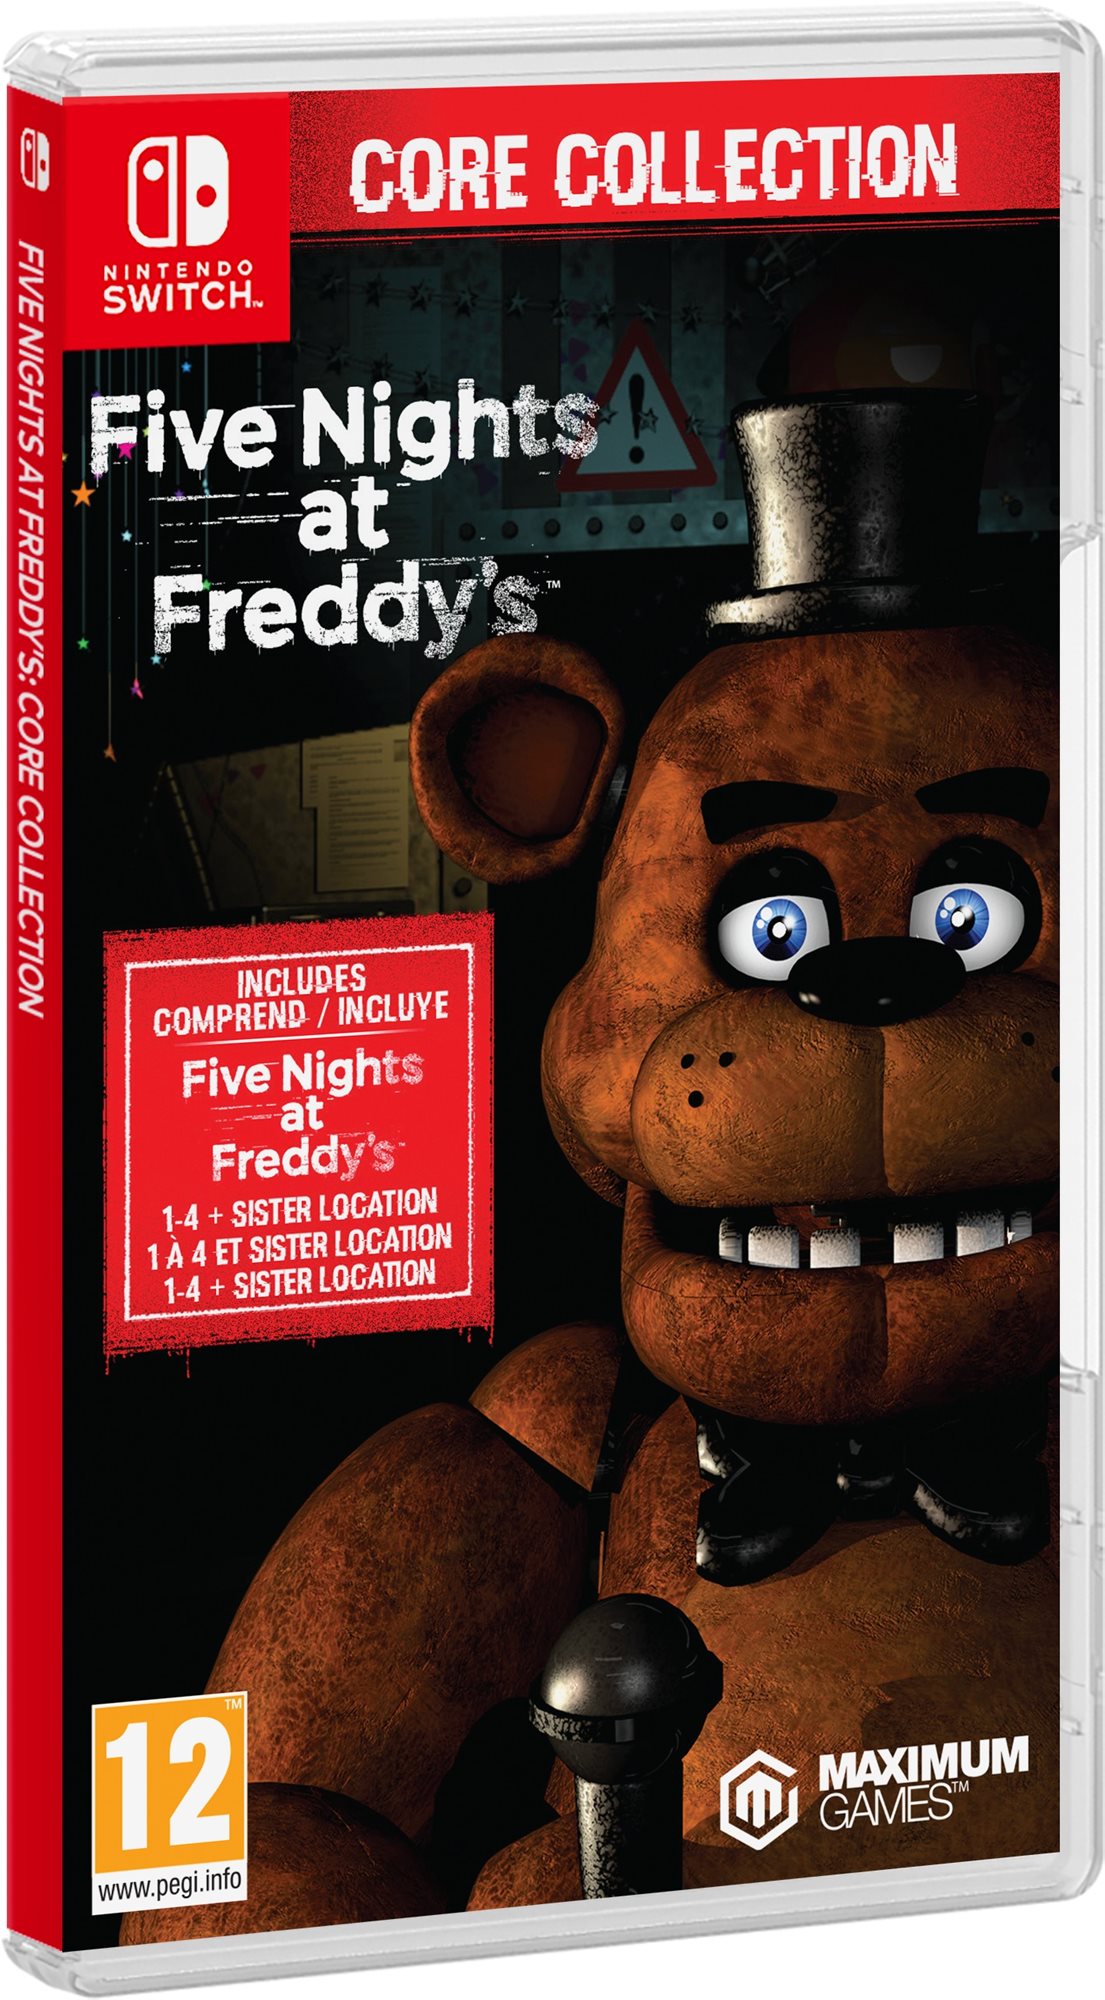 Five Nights at Freddys Core Collection - Nintendo Switch